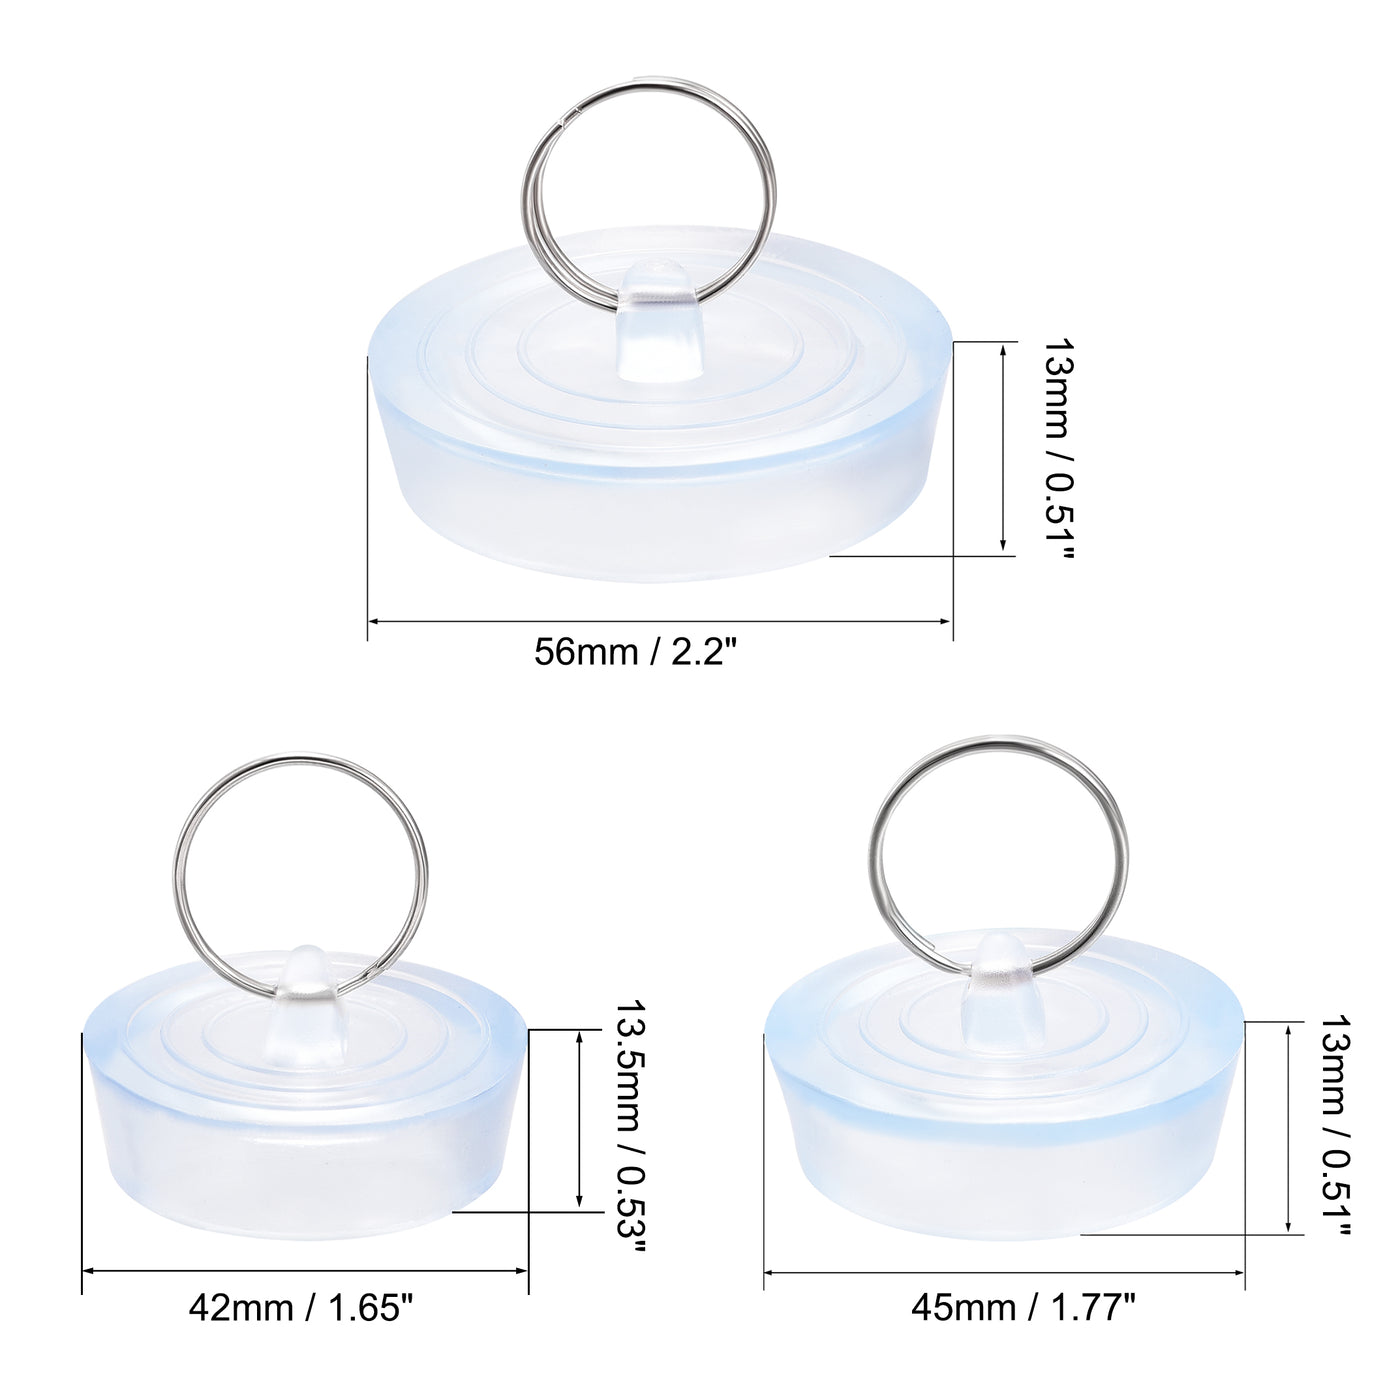 uxcell Uxcell Drain Stopper, 3 Sizes Rubber Sink Stopper Plug 37mm/41mm/52mm with Hanging Ring Clear Blue for Bathtub Kitchen and Bathroom 1Set (3 Pieces)